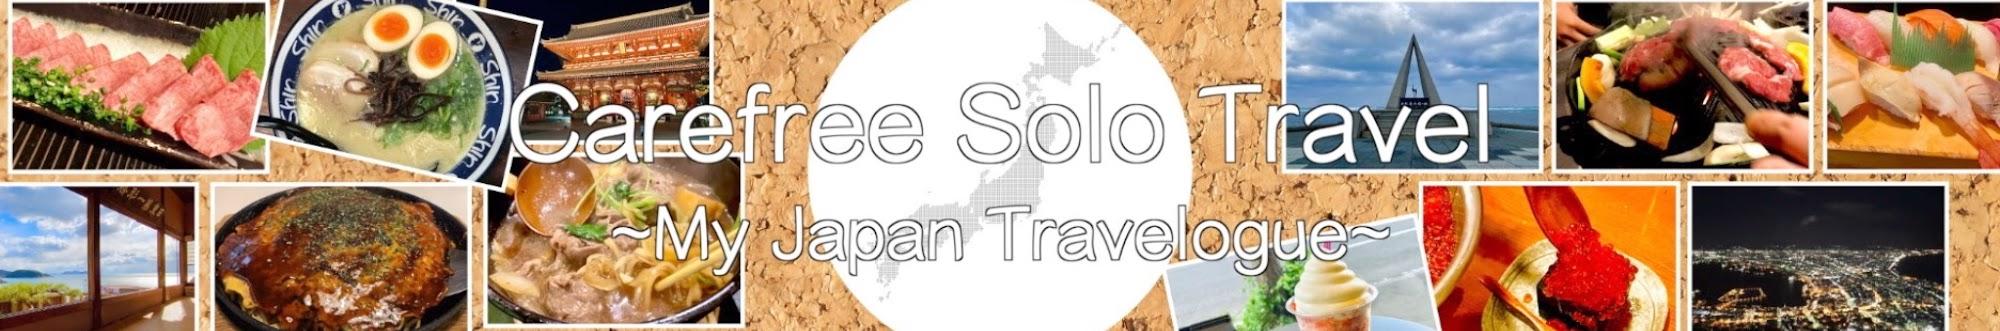 Japan Carefree Solo Travel